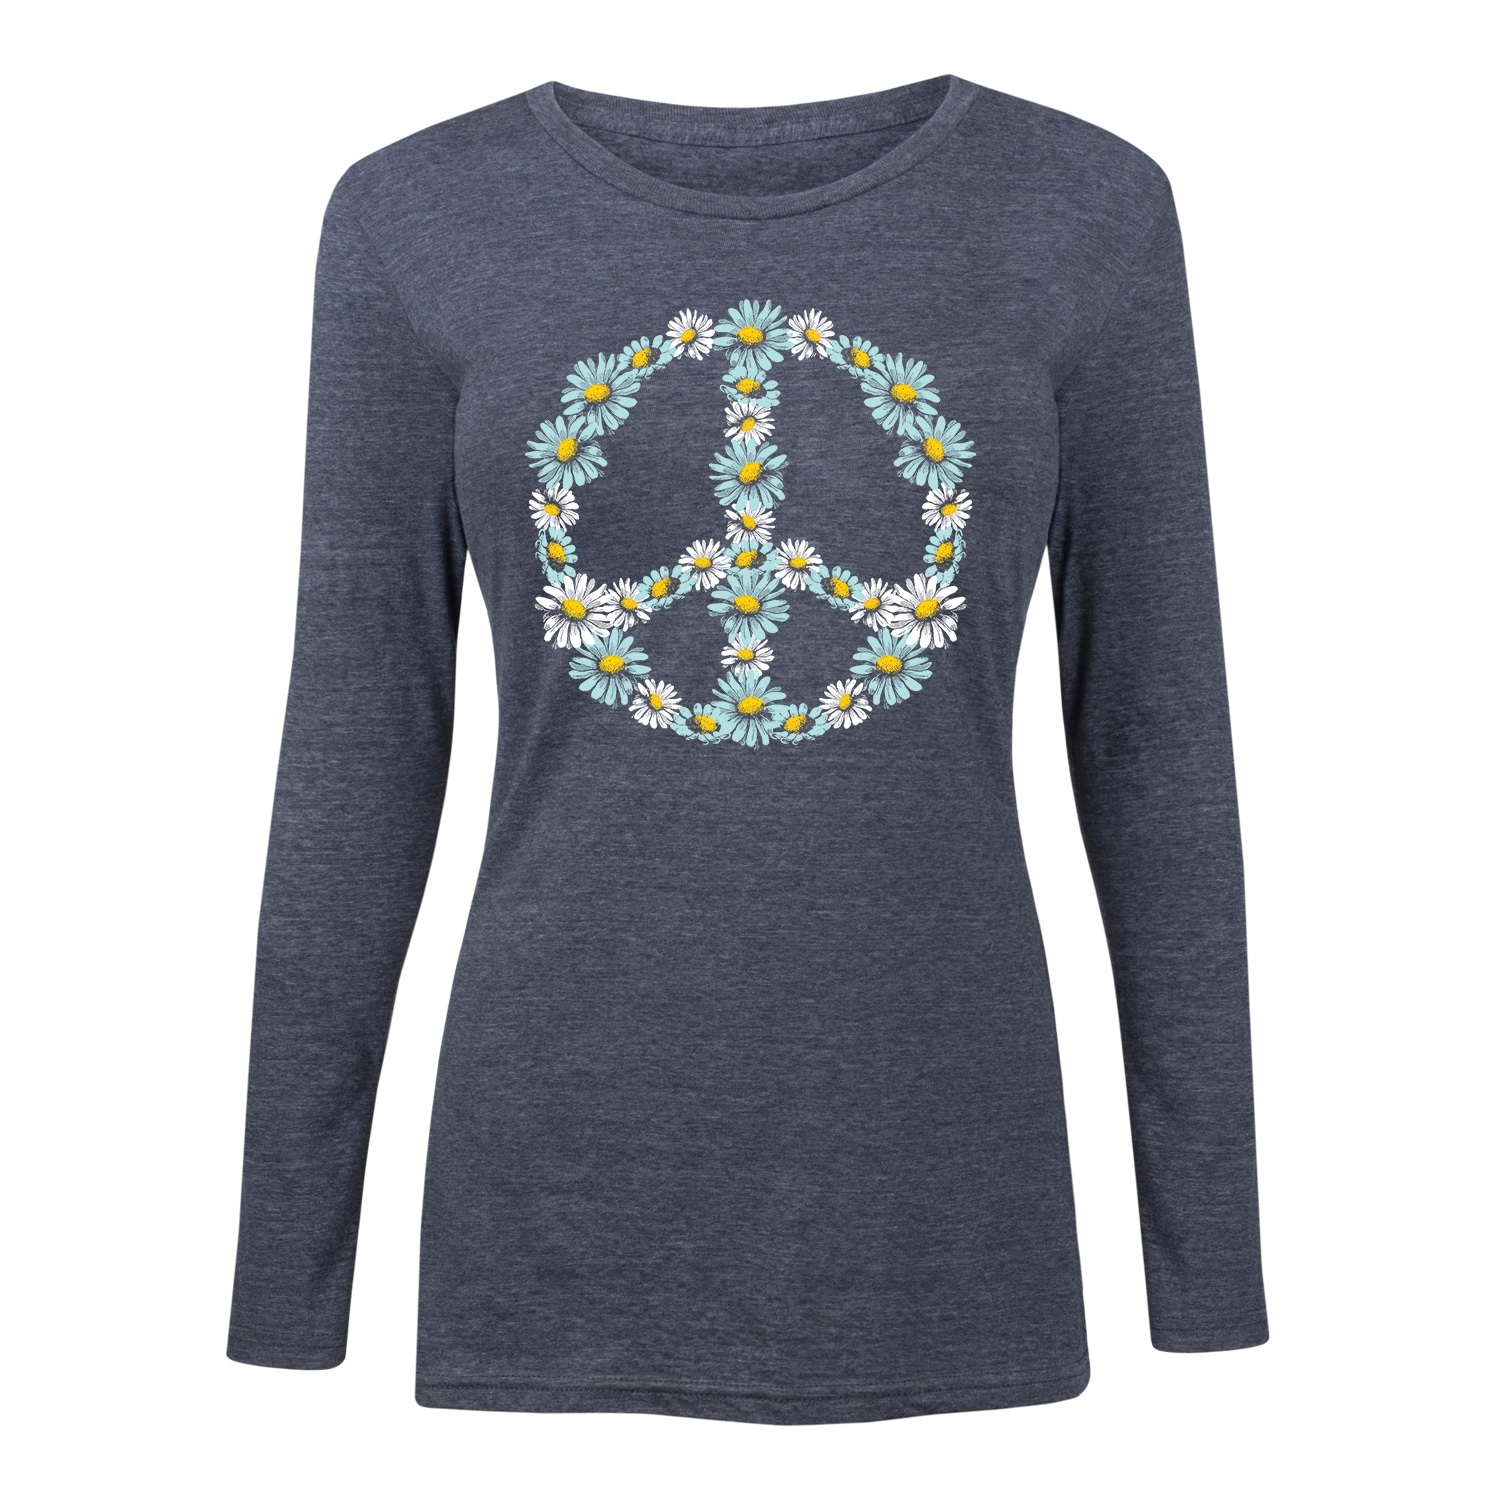 Floral Peace Sign - Women's Long Sleeve Tee